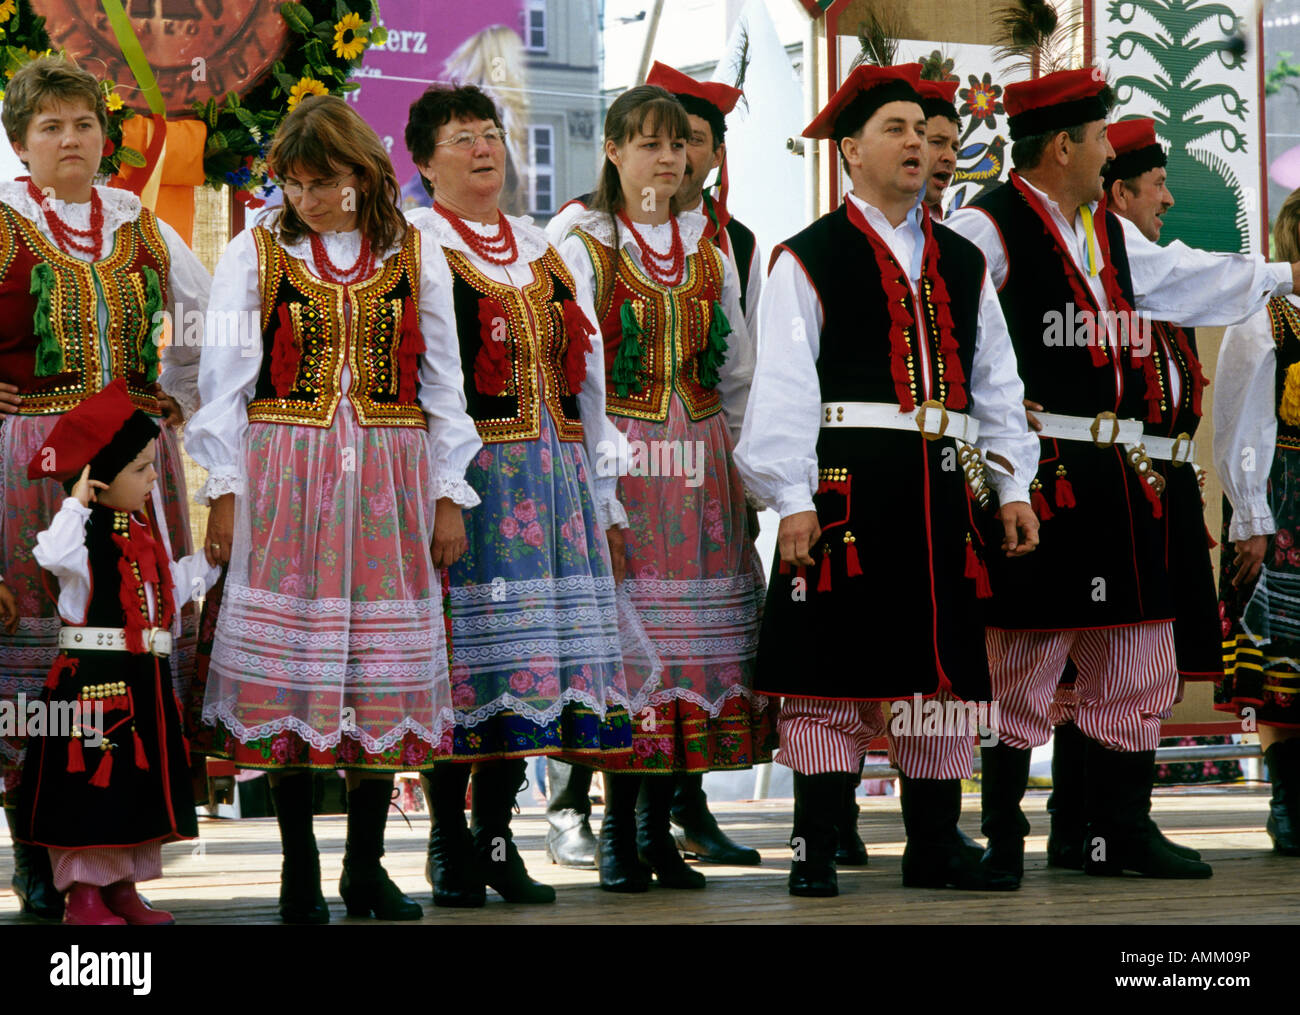 Poland Cracow folk musicians play traditional music Stock Photo